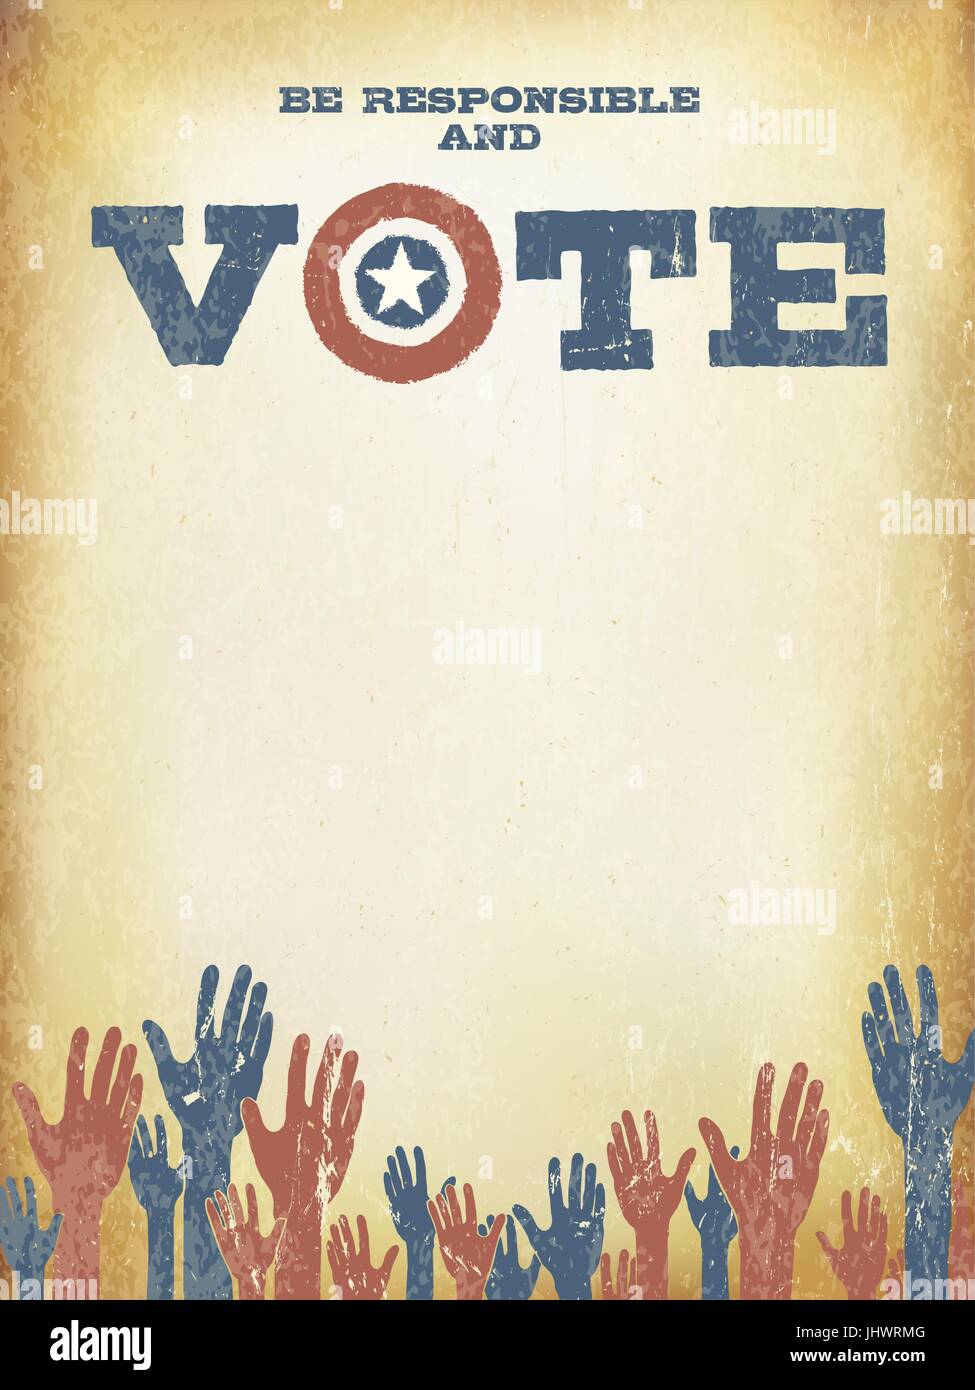 Be responsible and Vote! Vintage patriotic poster to encourage voting in elections. Voting poster design template, vintage styled. Stock Vector